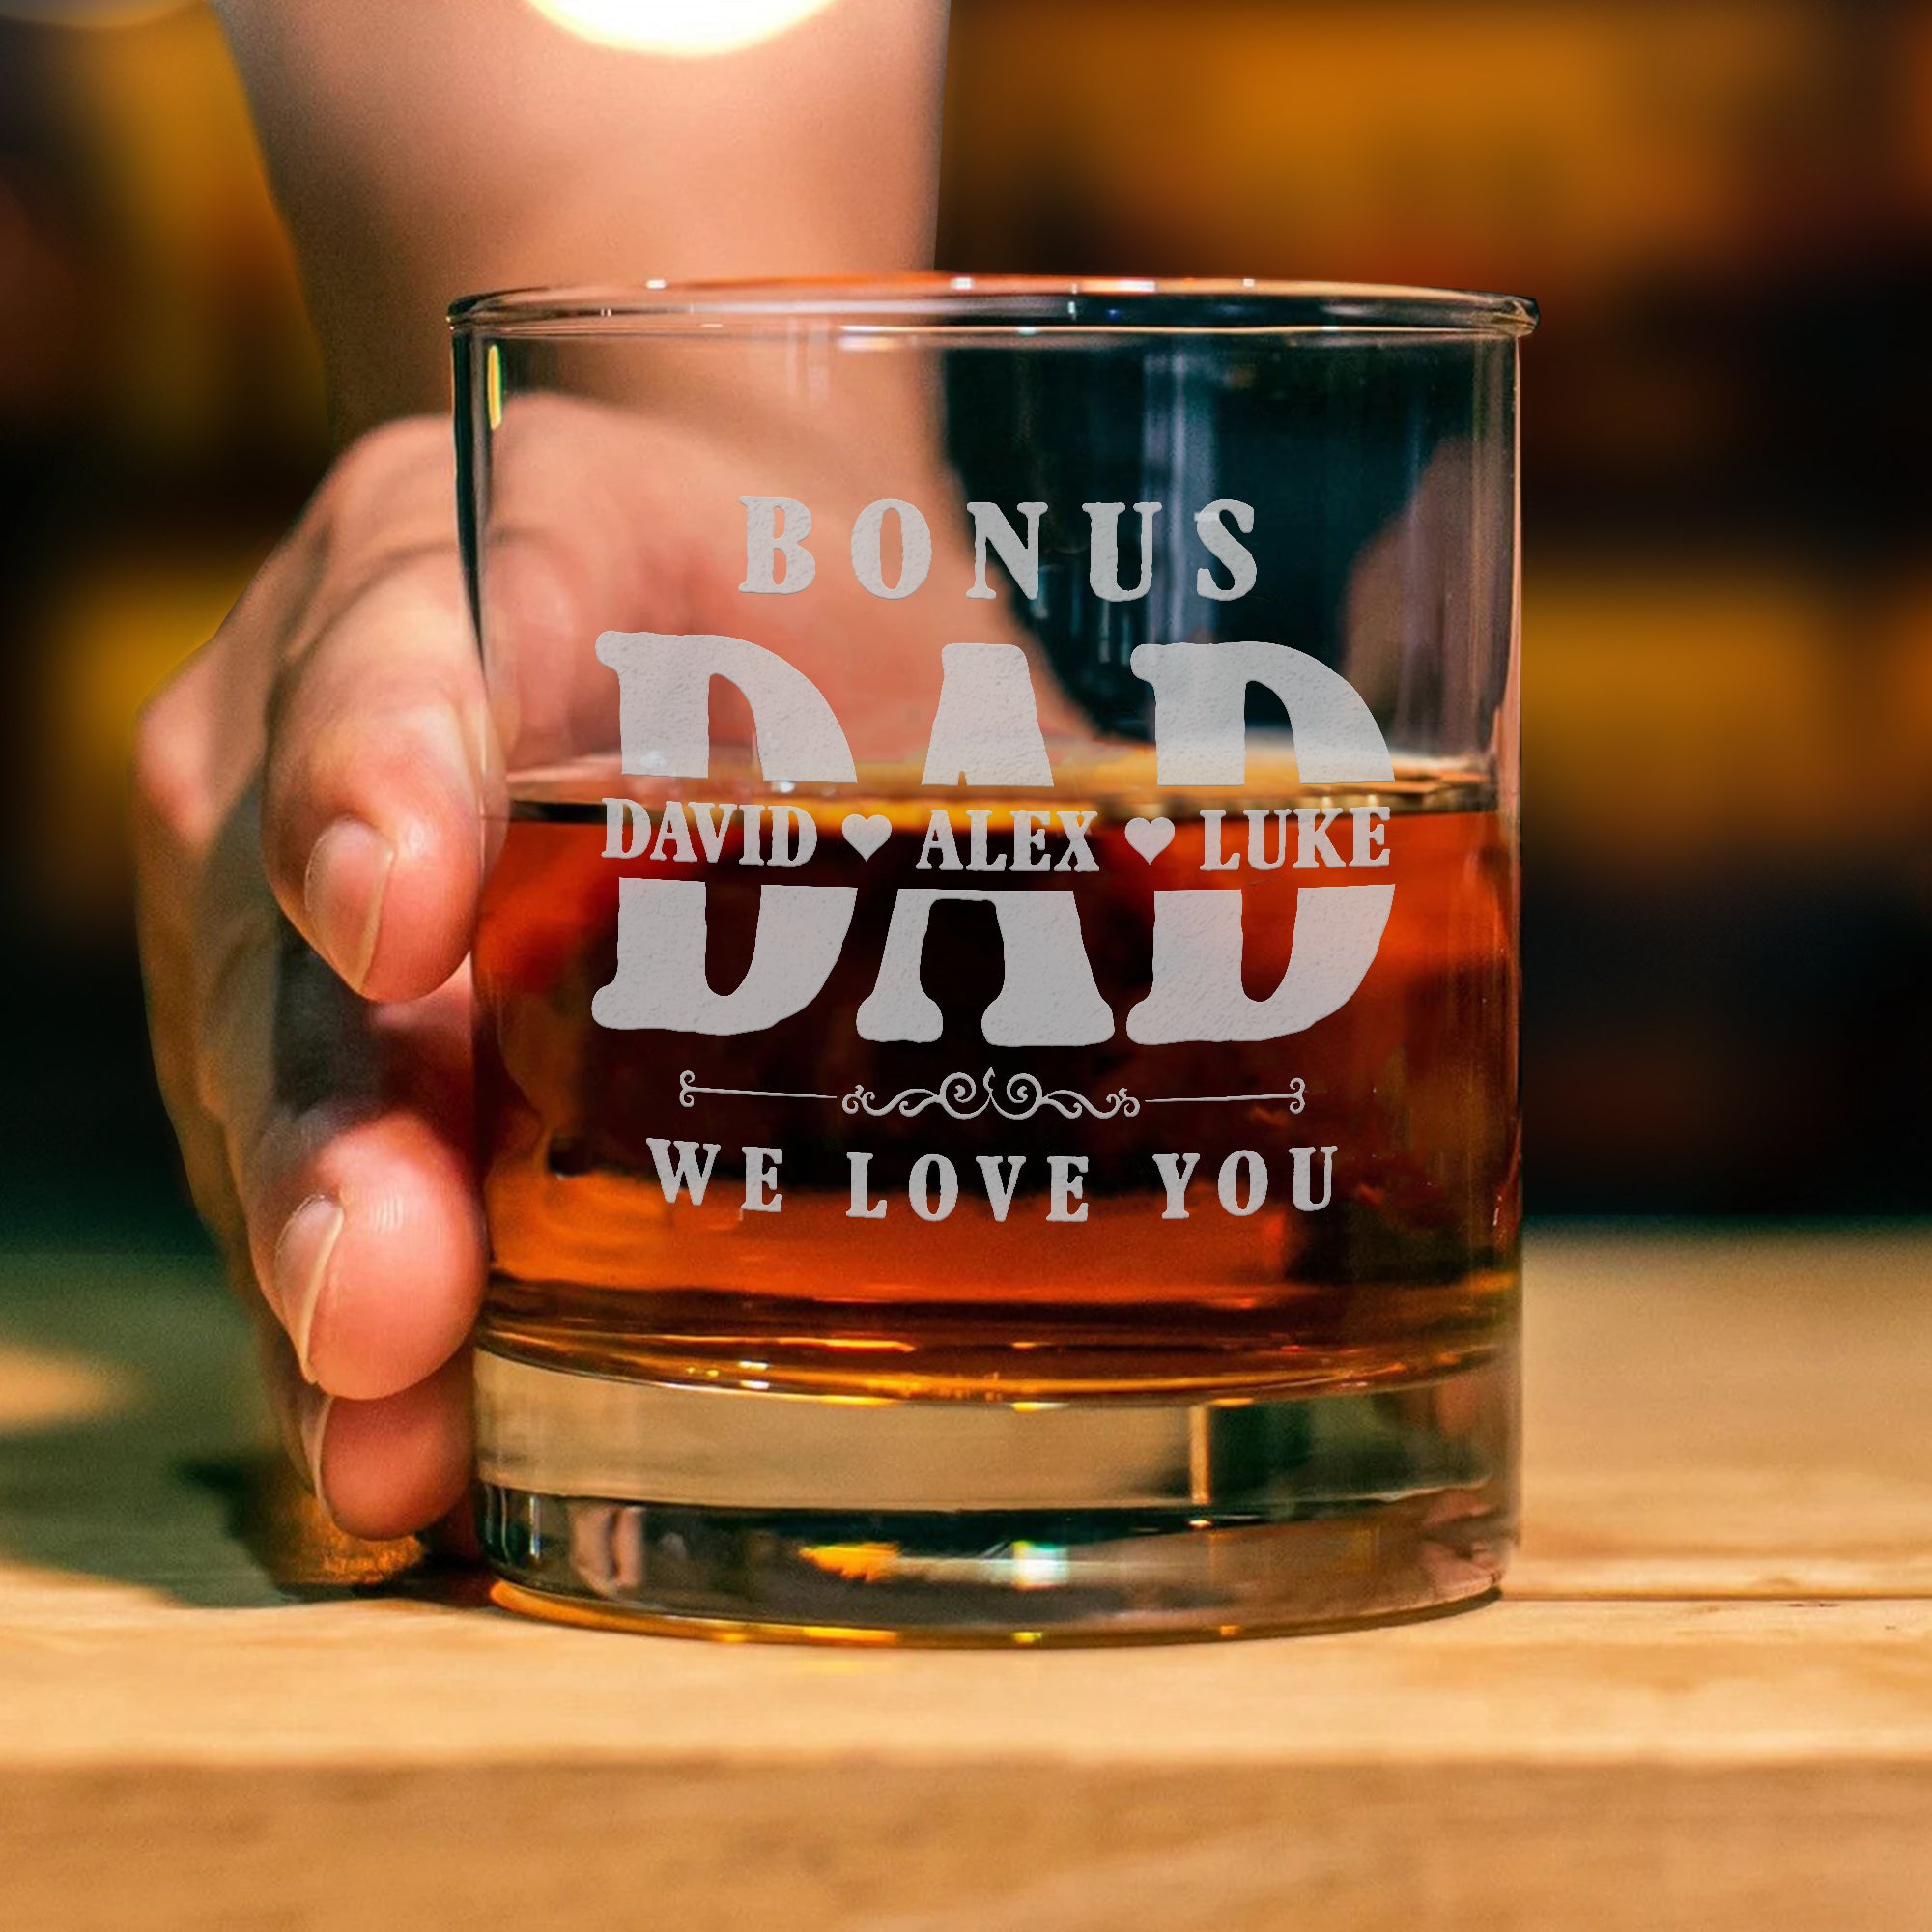 Personalized Father's Day Whiskey Glass- Custom Kids Name on Rock Glass for Dad, Bonus Dad - We Love You, Unique Gift for Dad